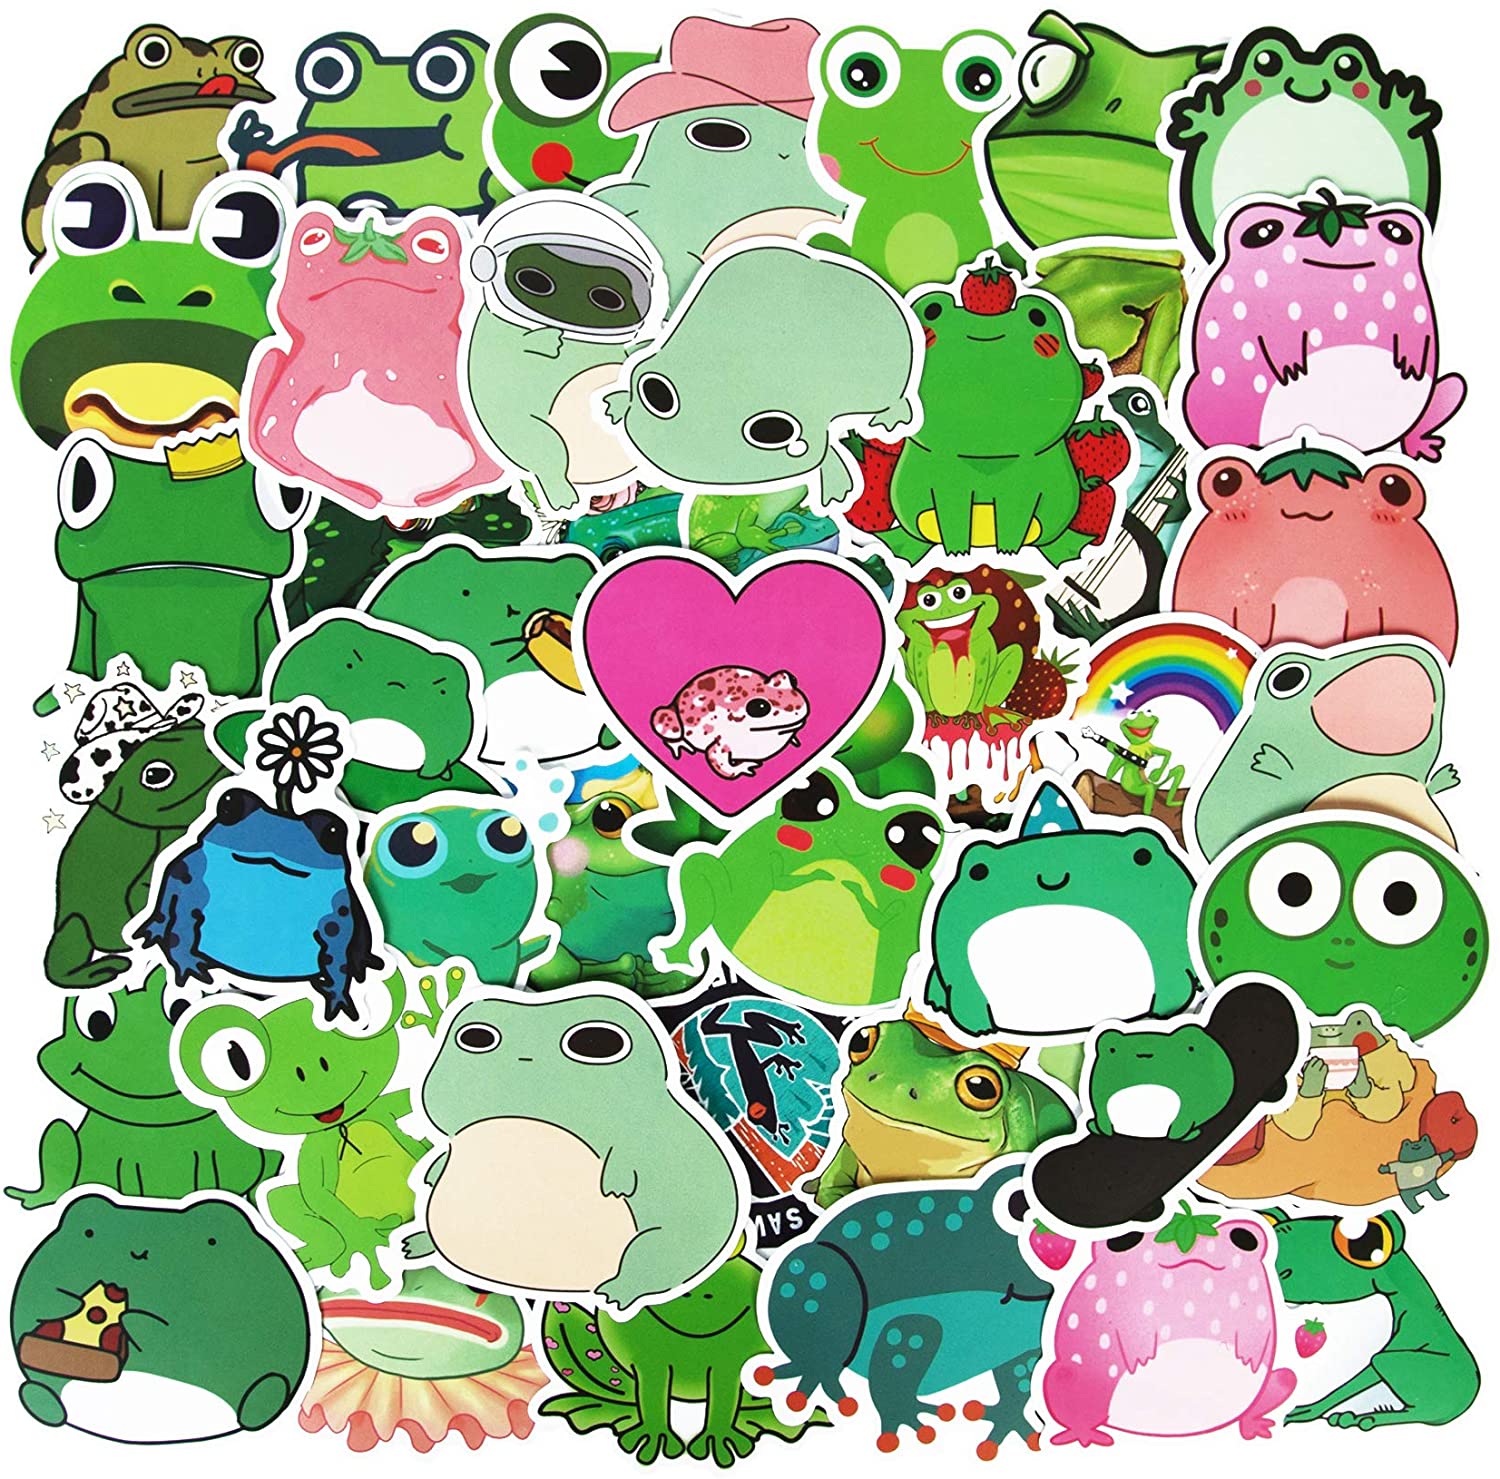 Vinyl Stickers, Frog Cute 50Pcs Aesthetic Decals and Sticker Frog Decoration DIY Teens for Stickers Laptop Trendy Skins & Decals affordable